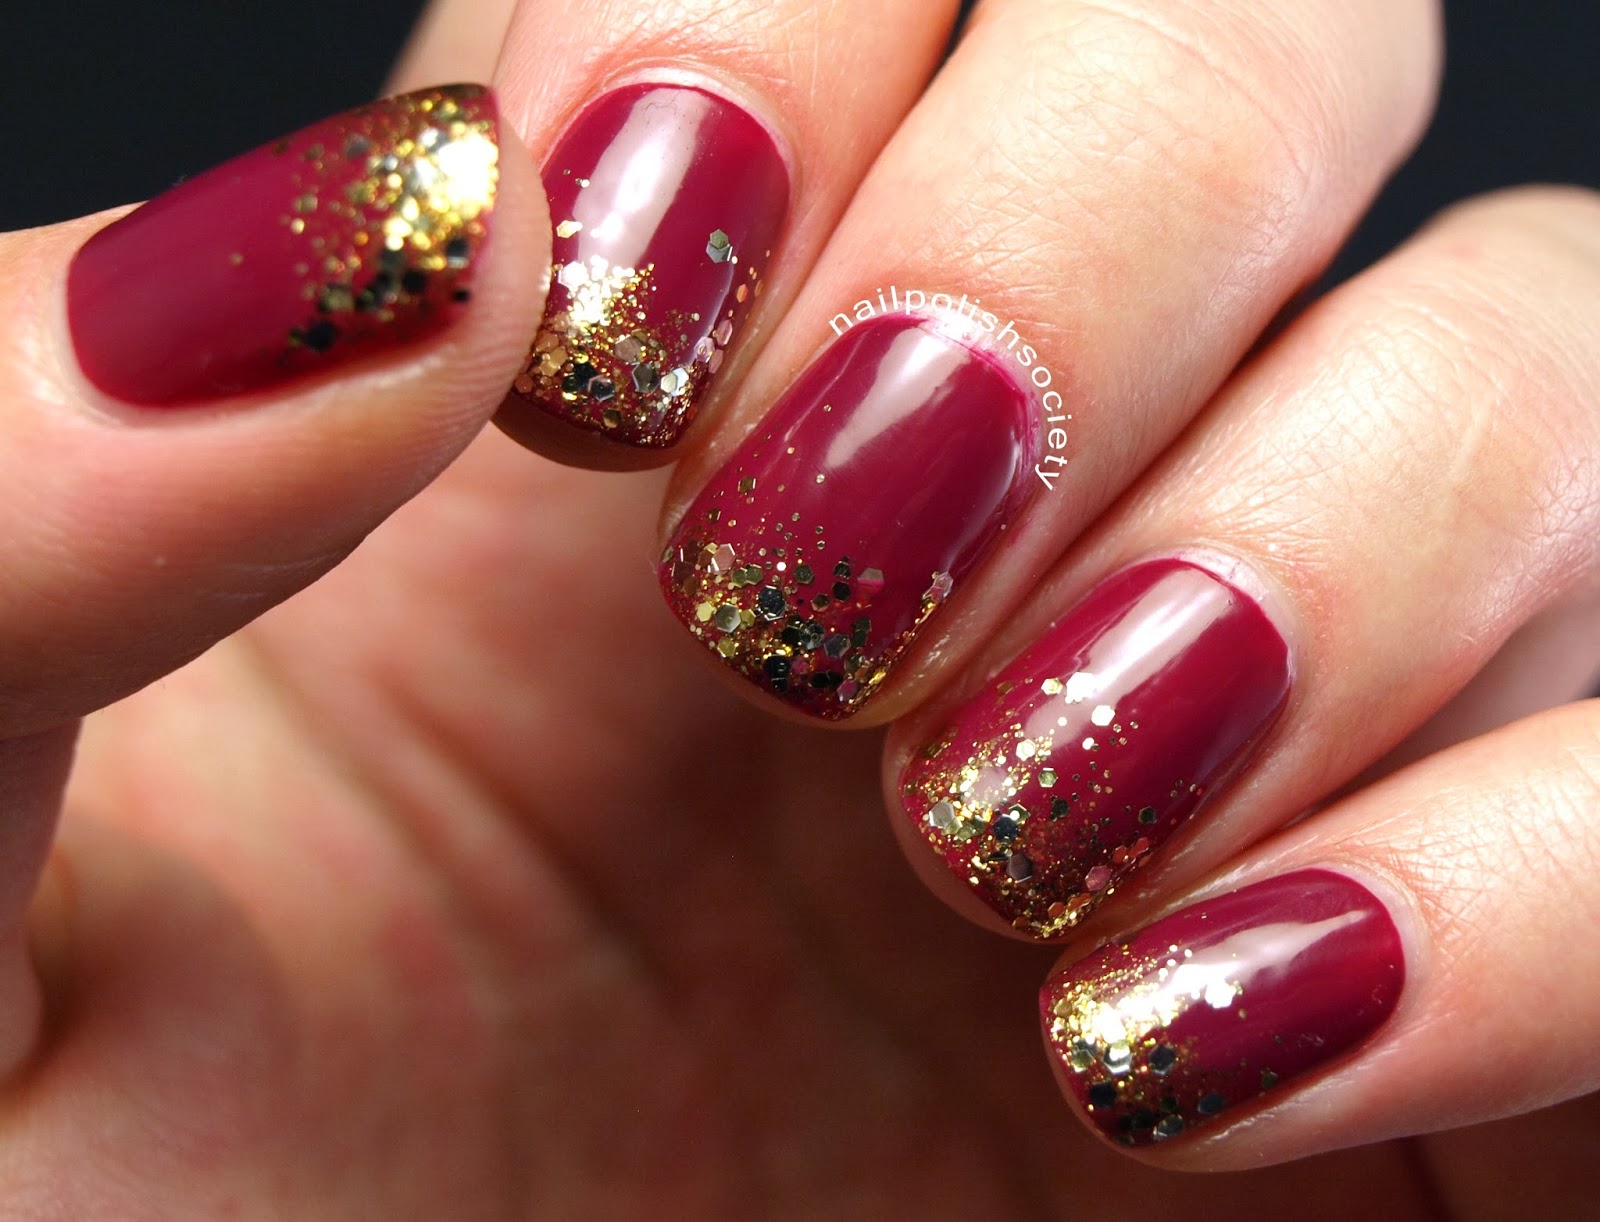 5. Sparkly Holiday Nails - wide 5